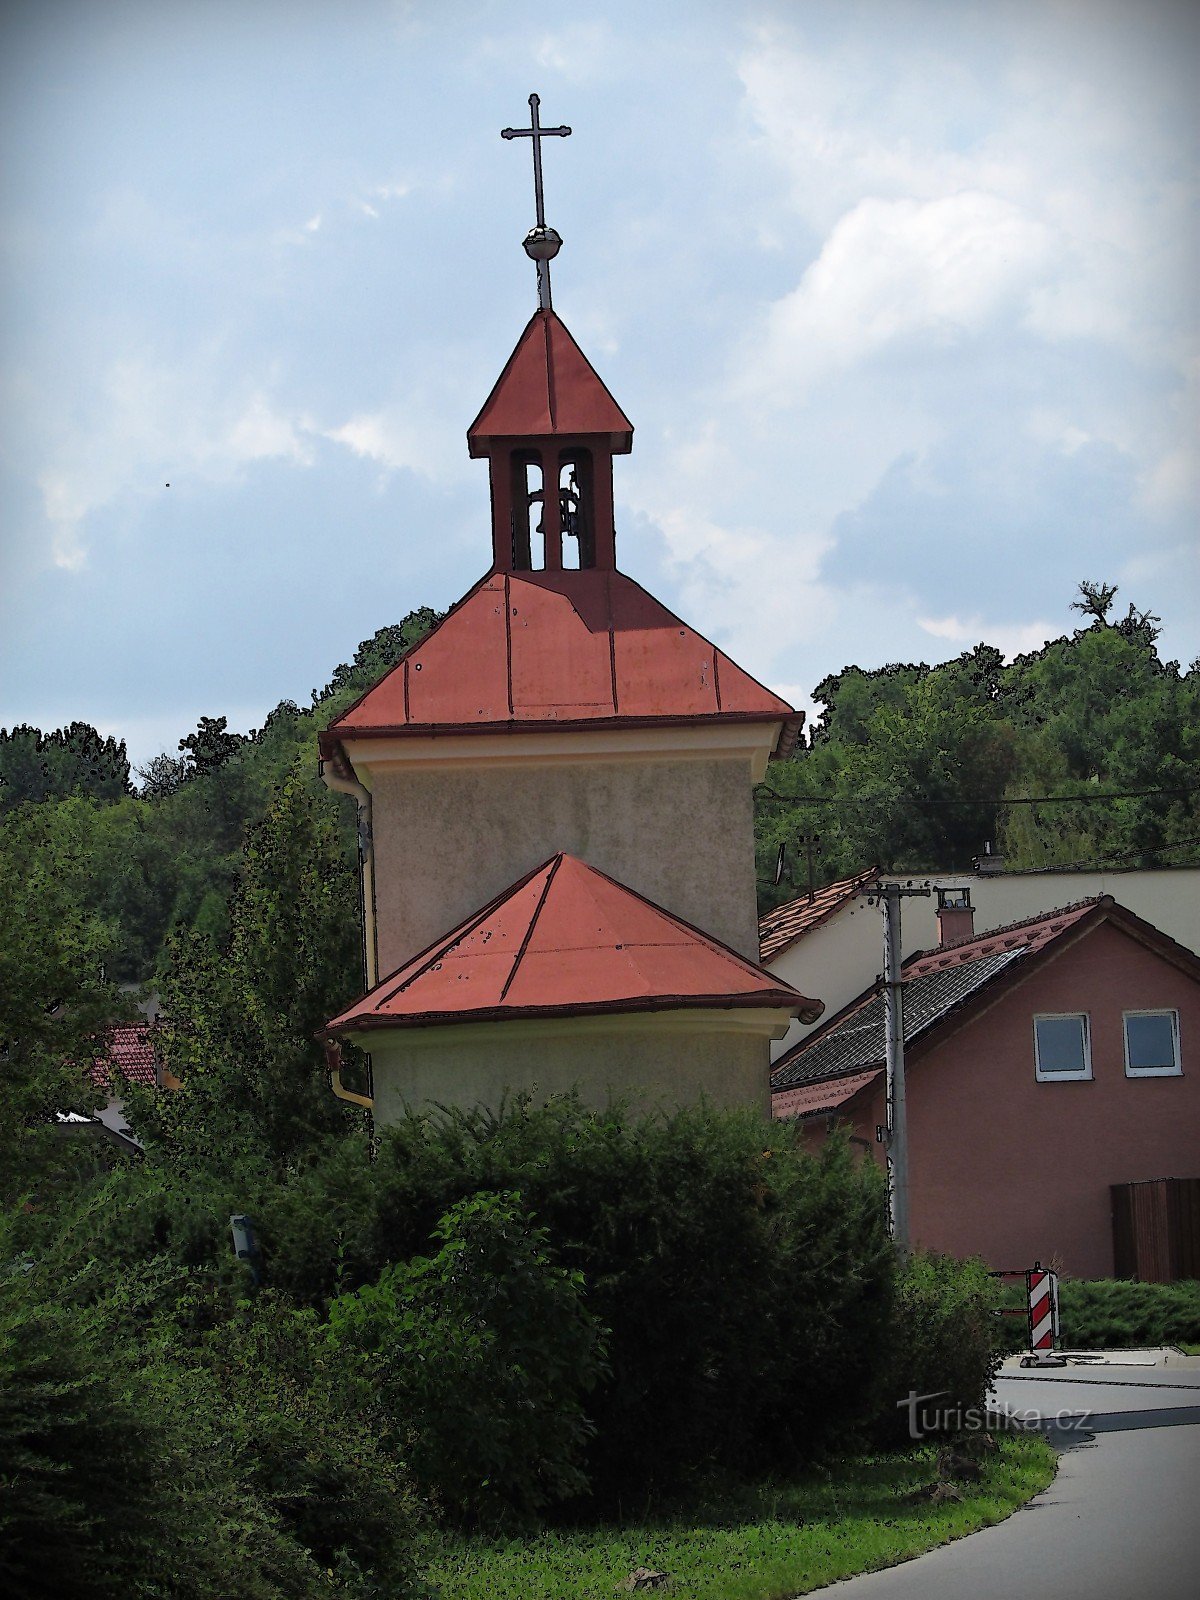 Chapel and cross in the village of Louky